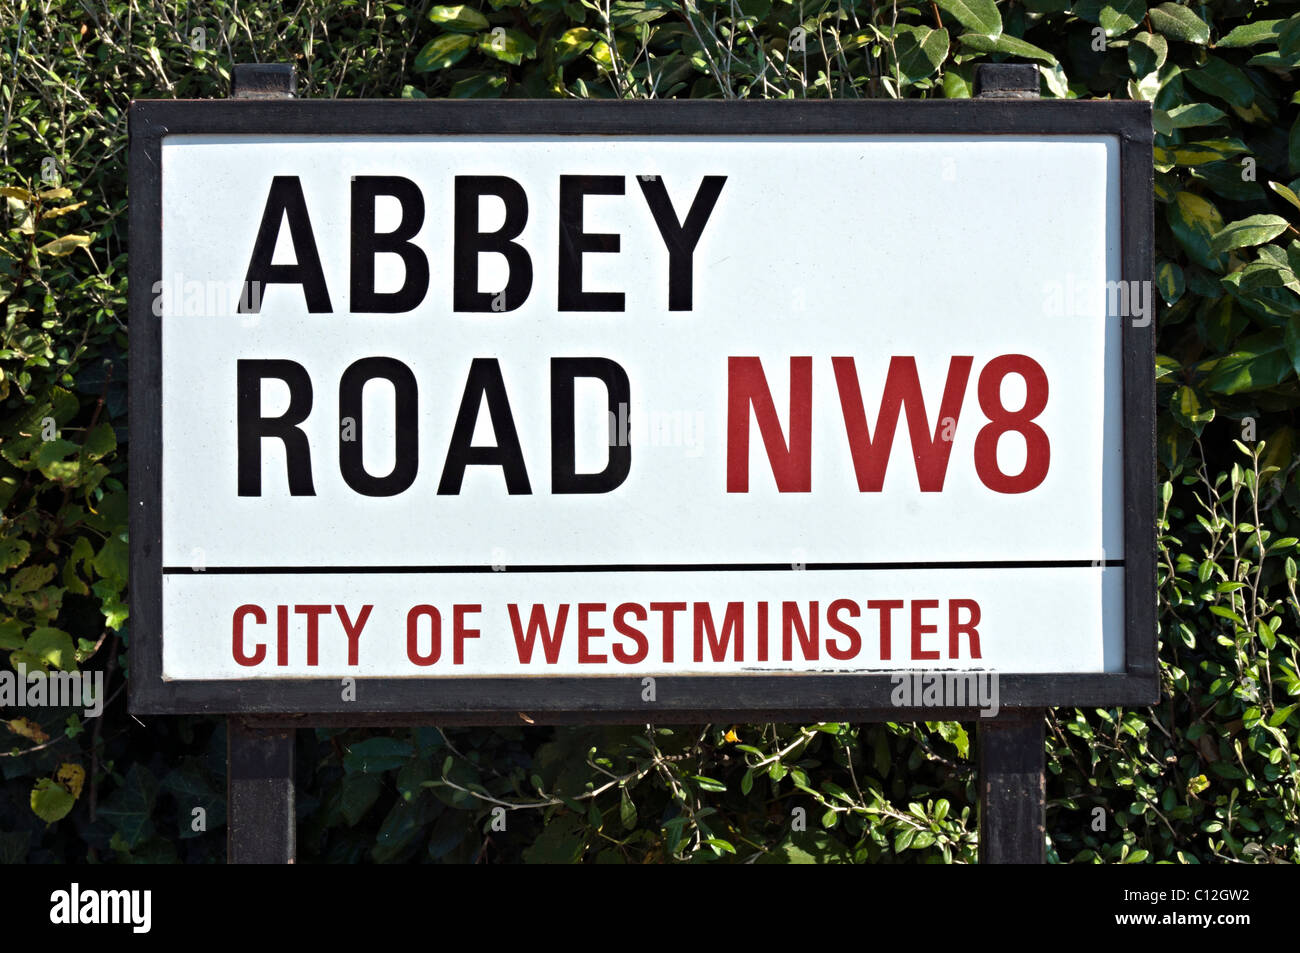 Abbey Road NW8 road sign, London Stock Photo